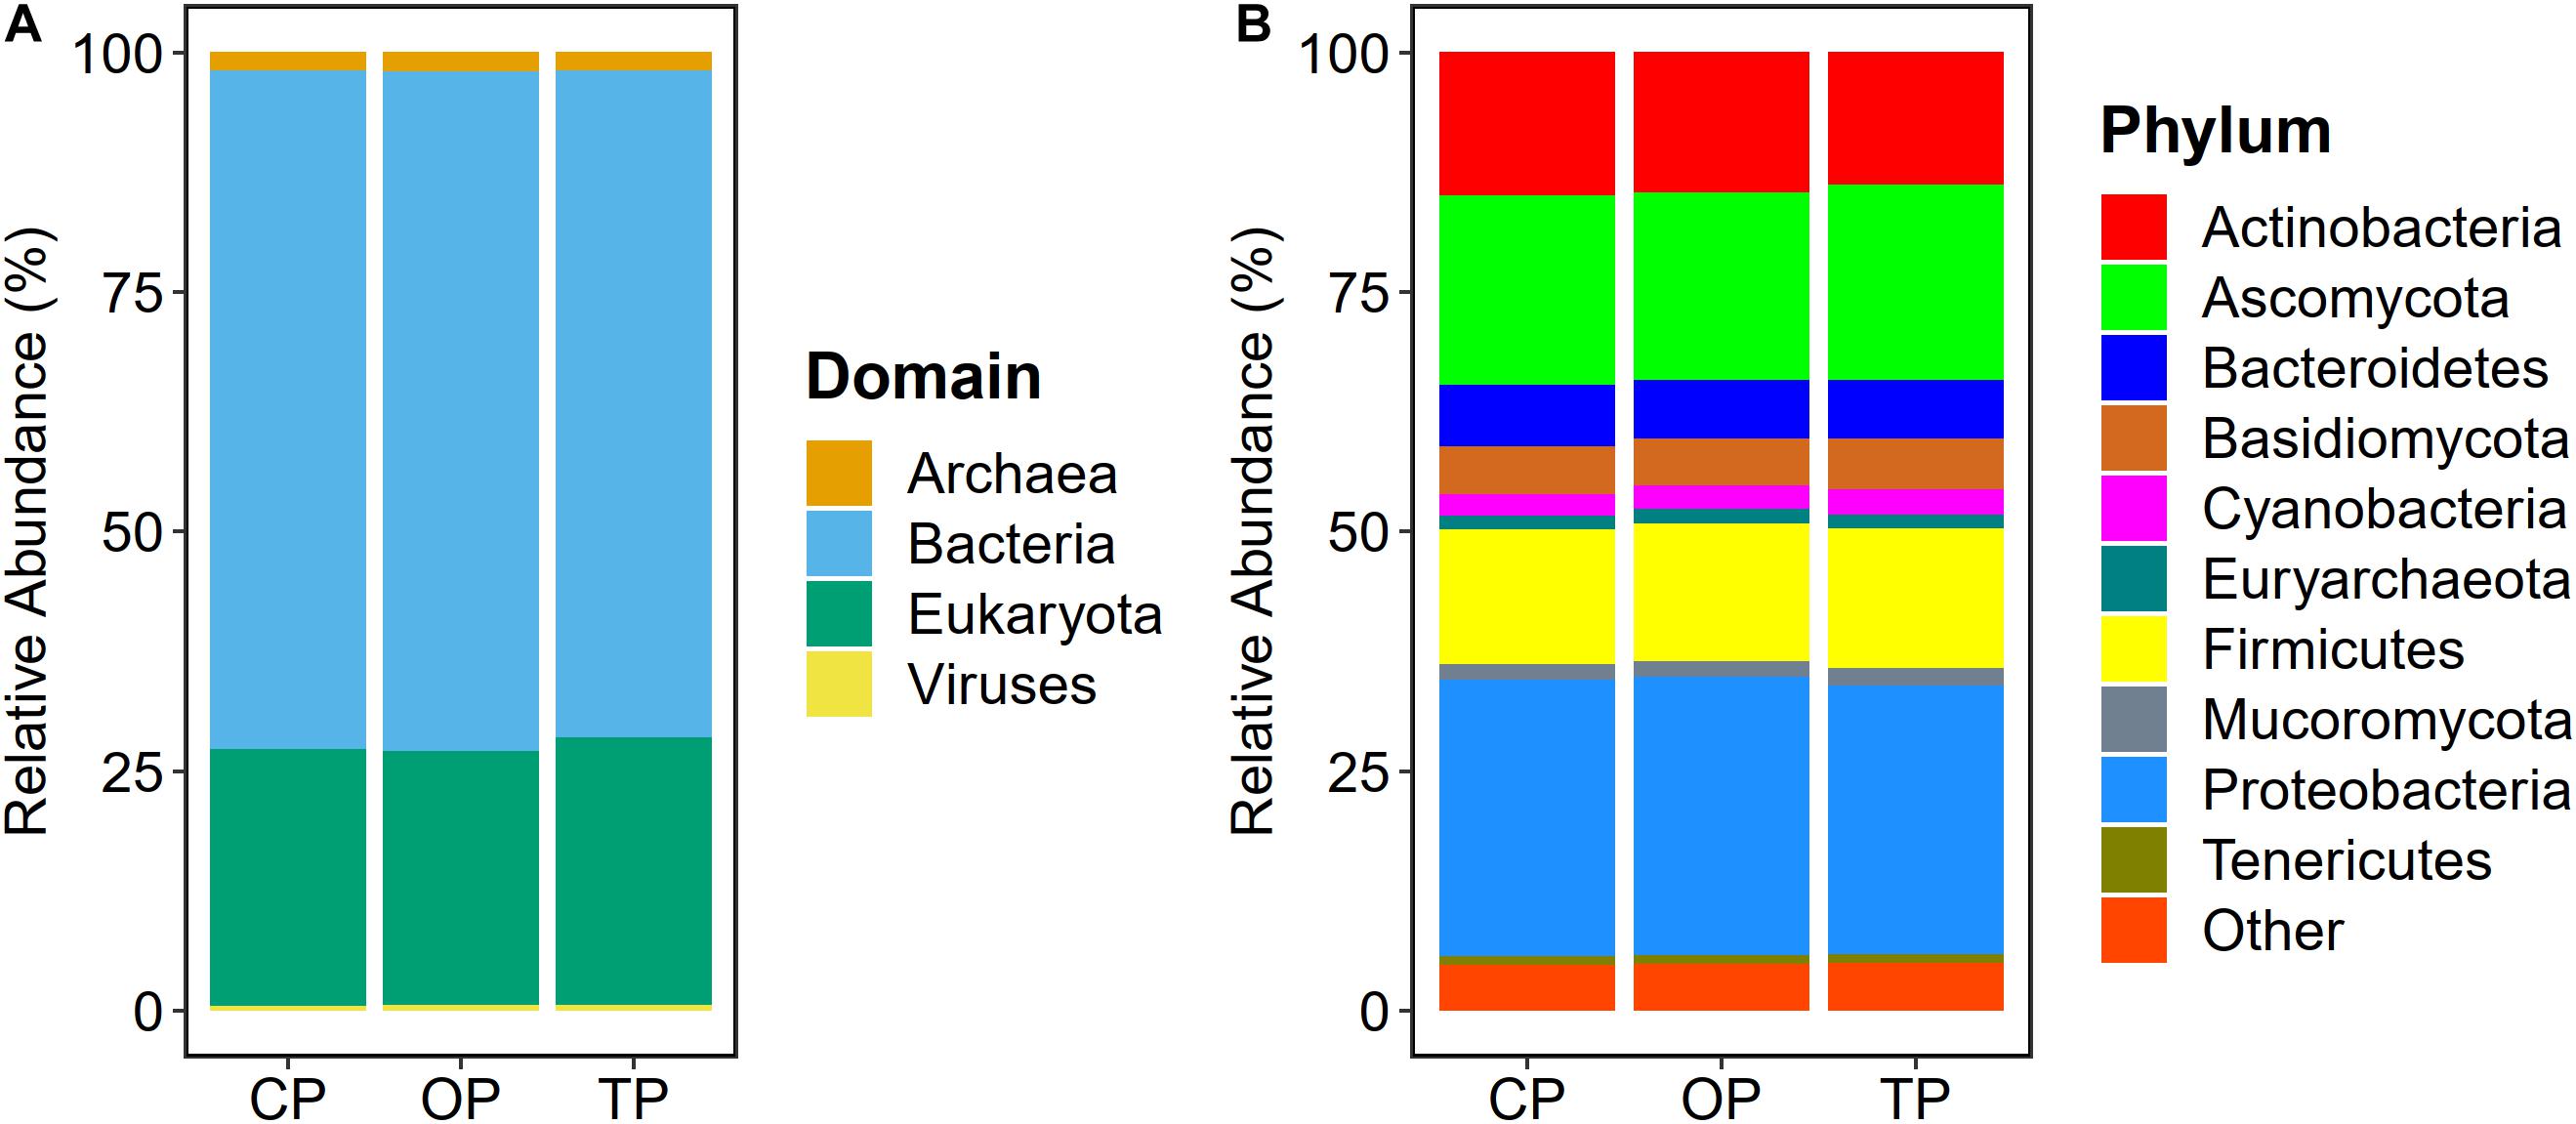 PDF) Comparative Analysis of Bacterial and Archaeal Community